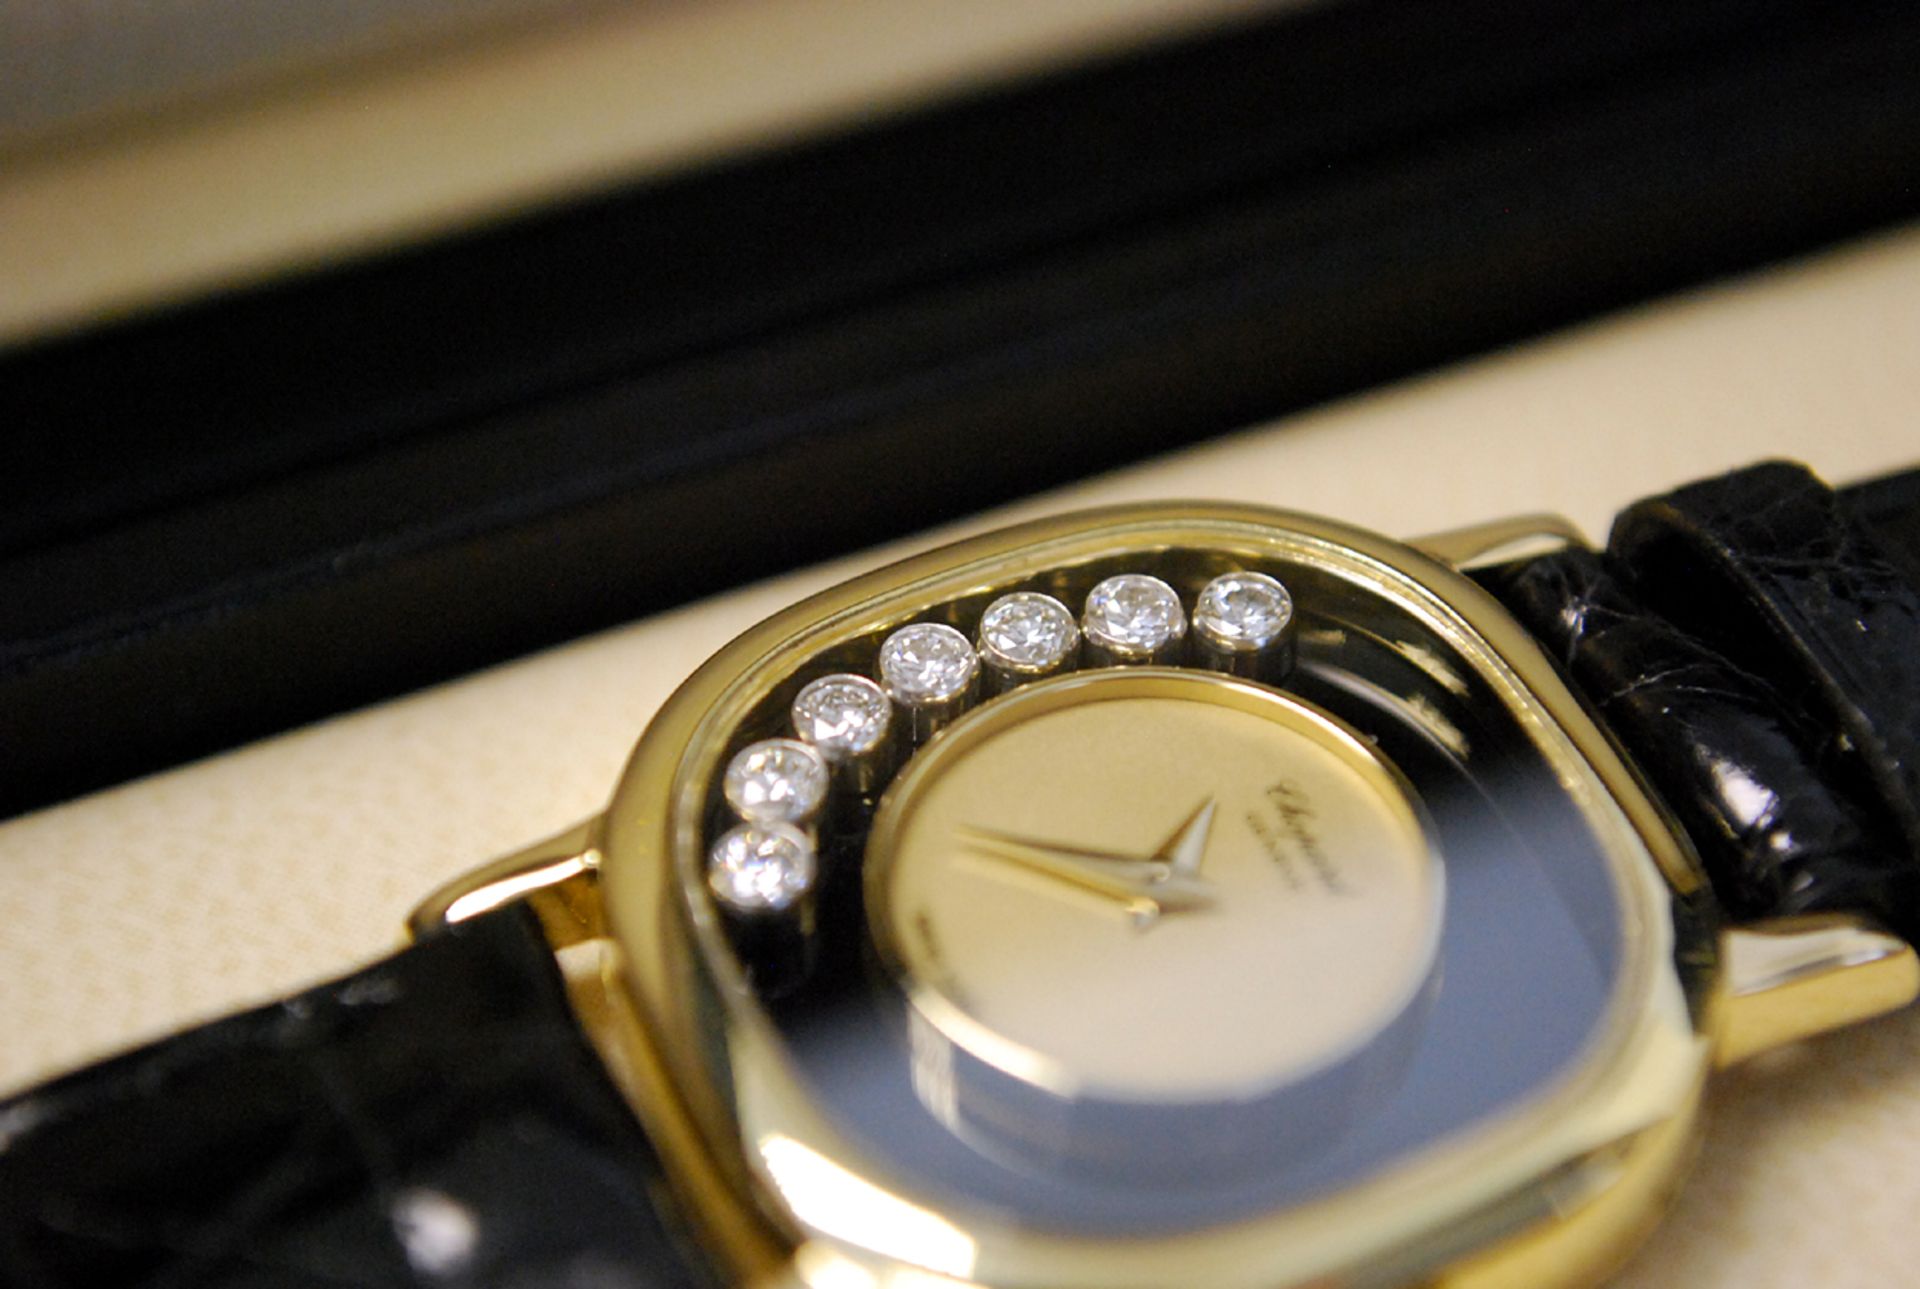 Chopard – Happy Diamonds 18k GOLD (203355)   CHOPARD VALUATION (As Pictured): £7,430.00 - Image 5 of 14